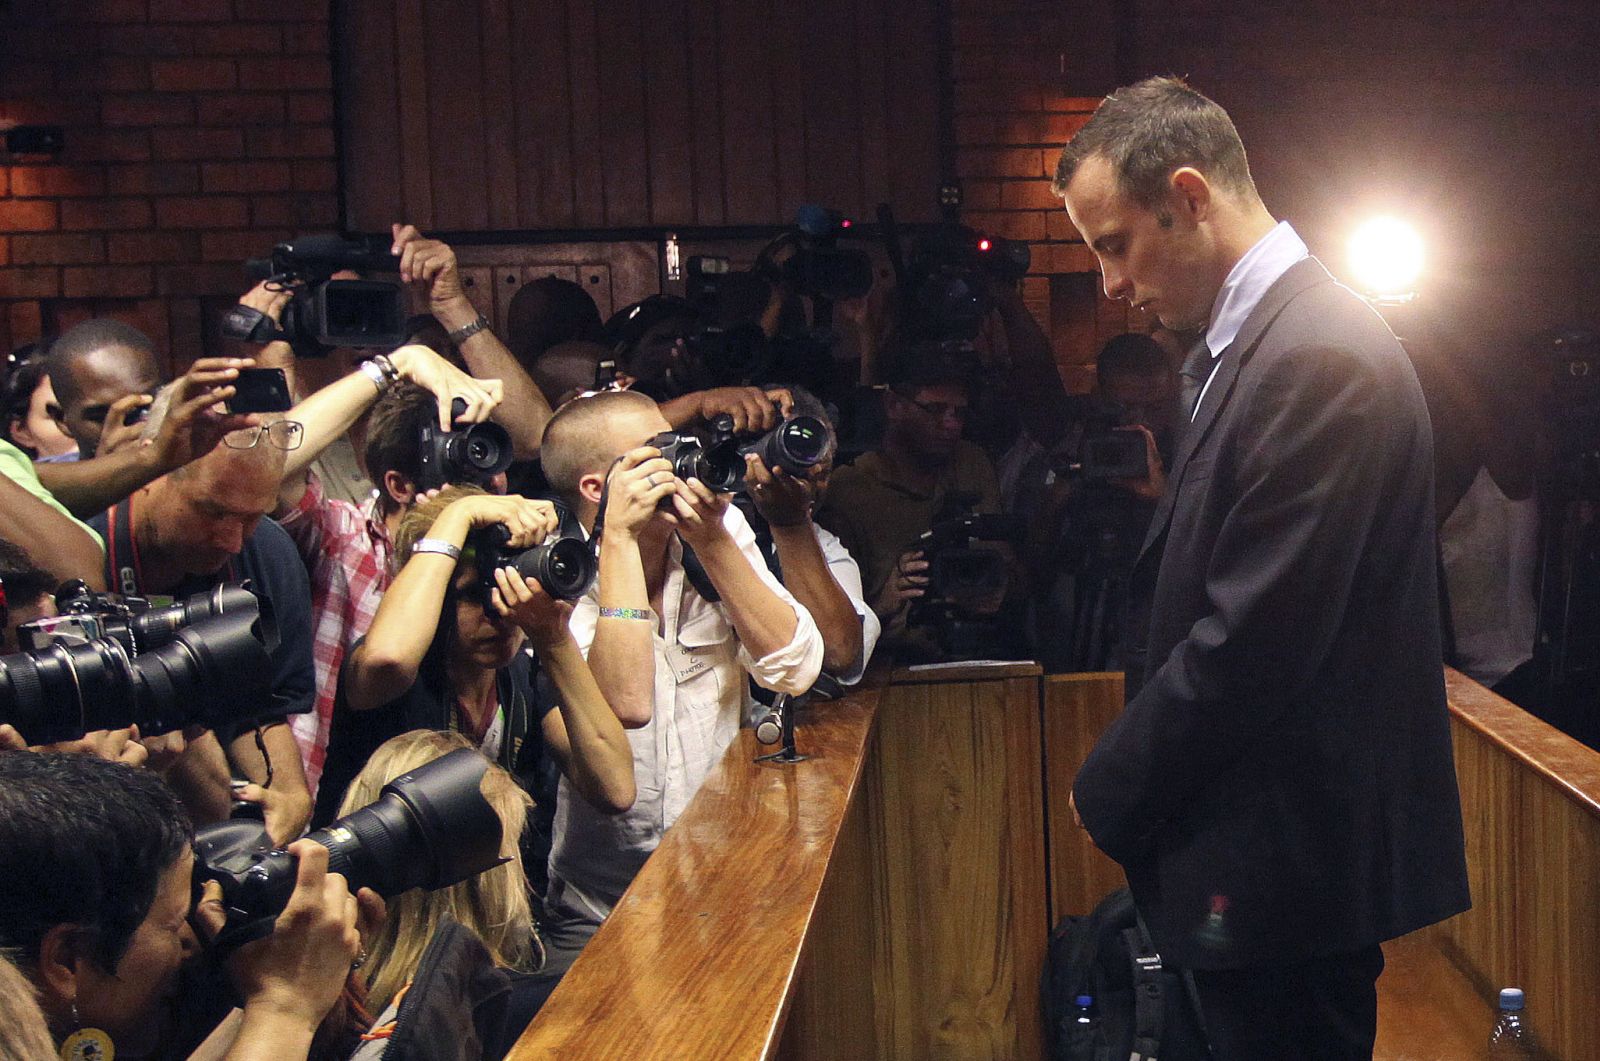 FILE - In this Friday, Feb 22, 2013 file photo photographers take photos of Olympic athlete Oscar Pistorius as he appears at a bail hearing for the shooting death of his girlfriend Reeva Steenkamp, in Pretoria, South Africa.  Pistorius could be granted parole on Friday, Nov. 24, 2023 after nearly 10 years in prison for killing his girlfriend. The double-amputee Olympic runner was convicted of a charge comparable to third-degree murder for shooting Reeva Steenkamp in his home in 2013. He has been in prison since late 2014. (AP Photo/Themba Hadebe, File)